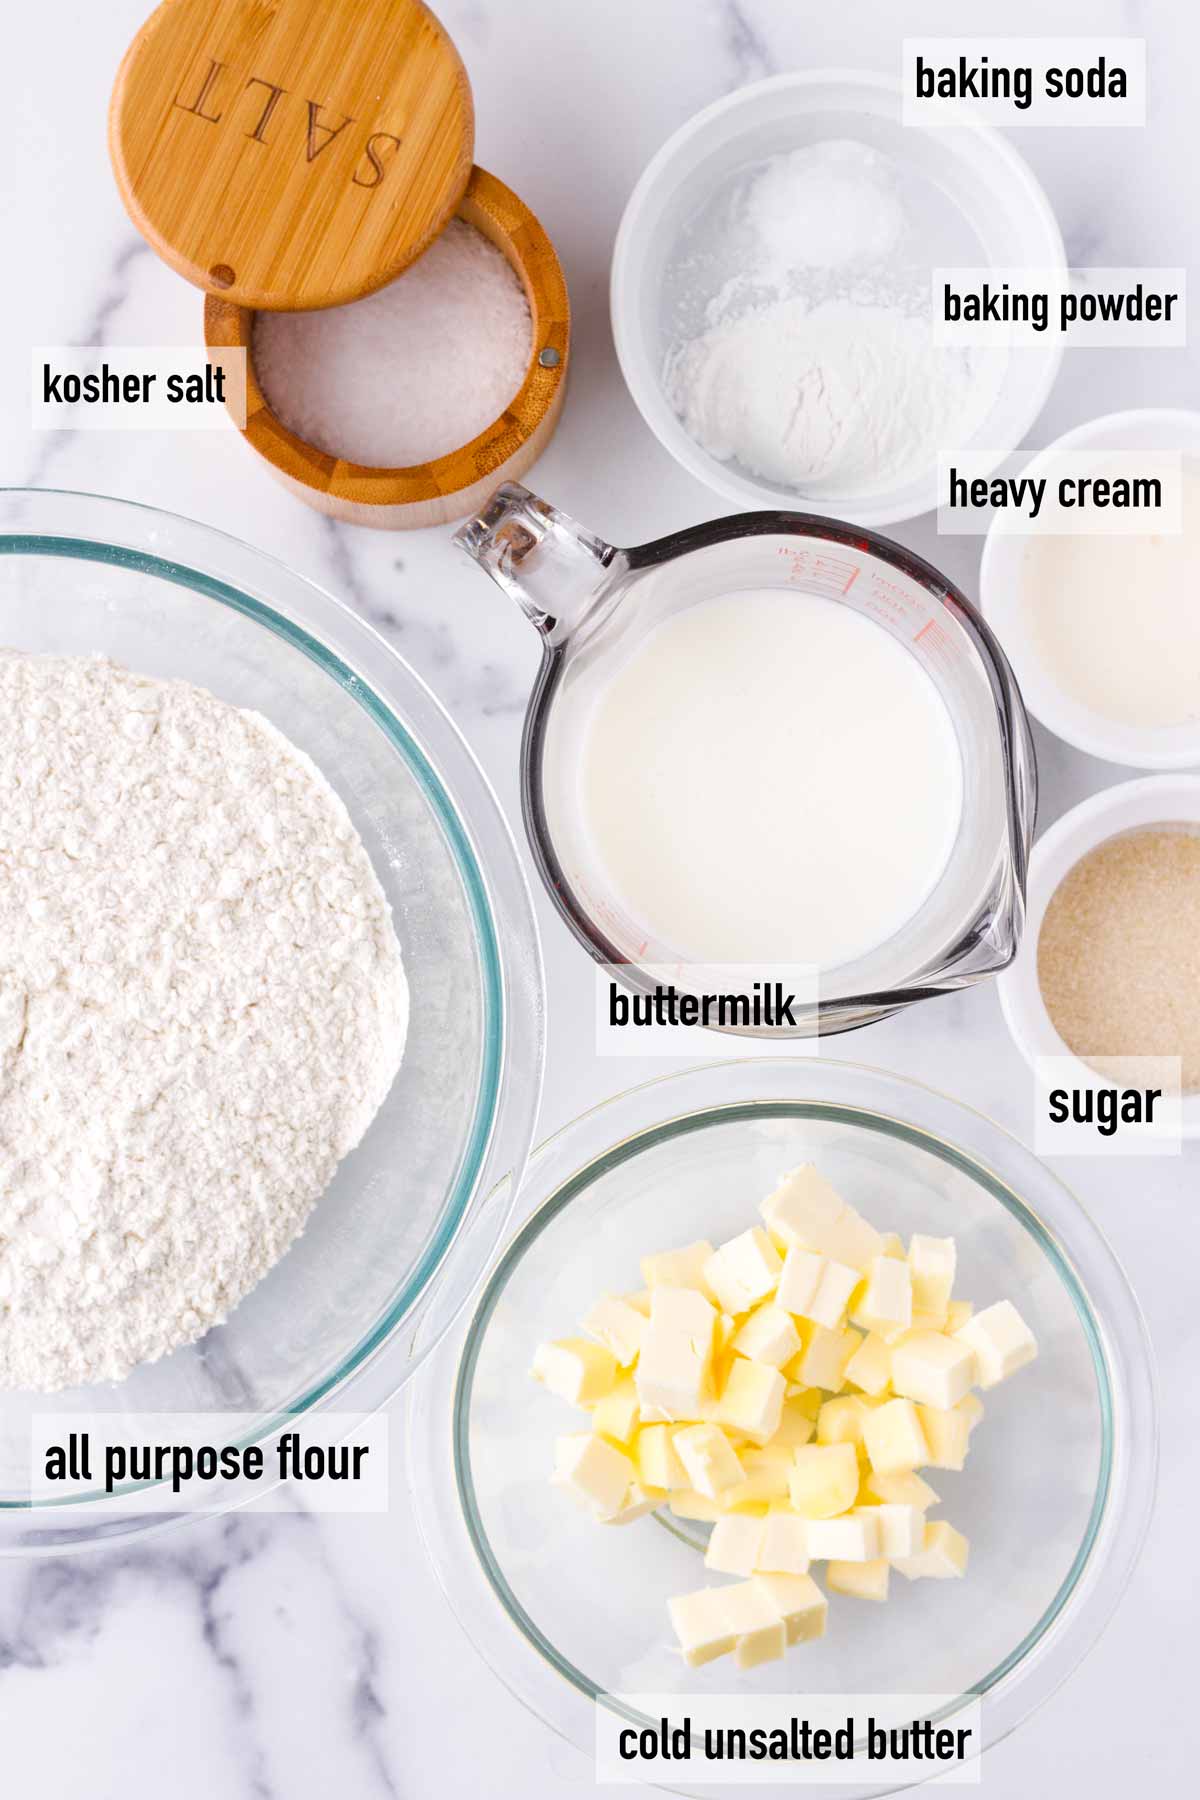 labeled ingredients to make buttermik biscuits